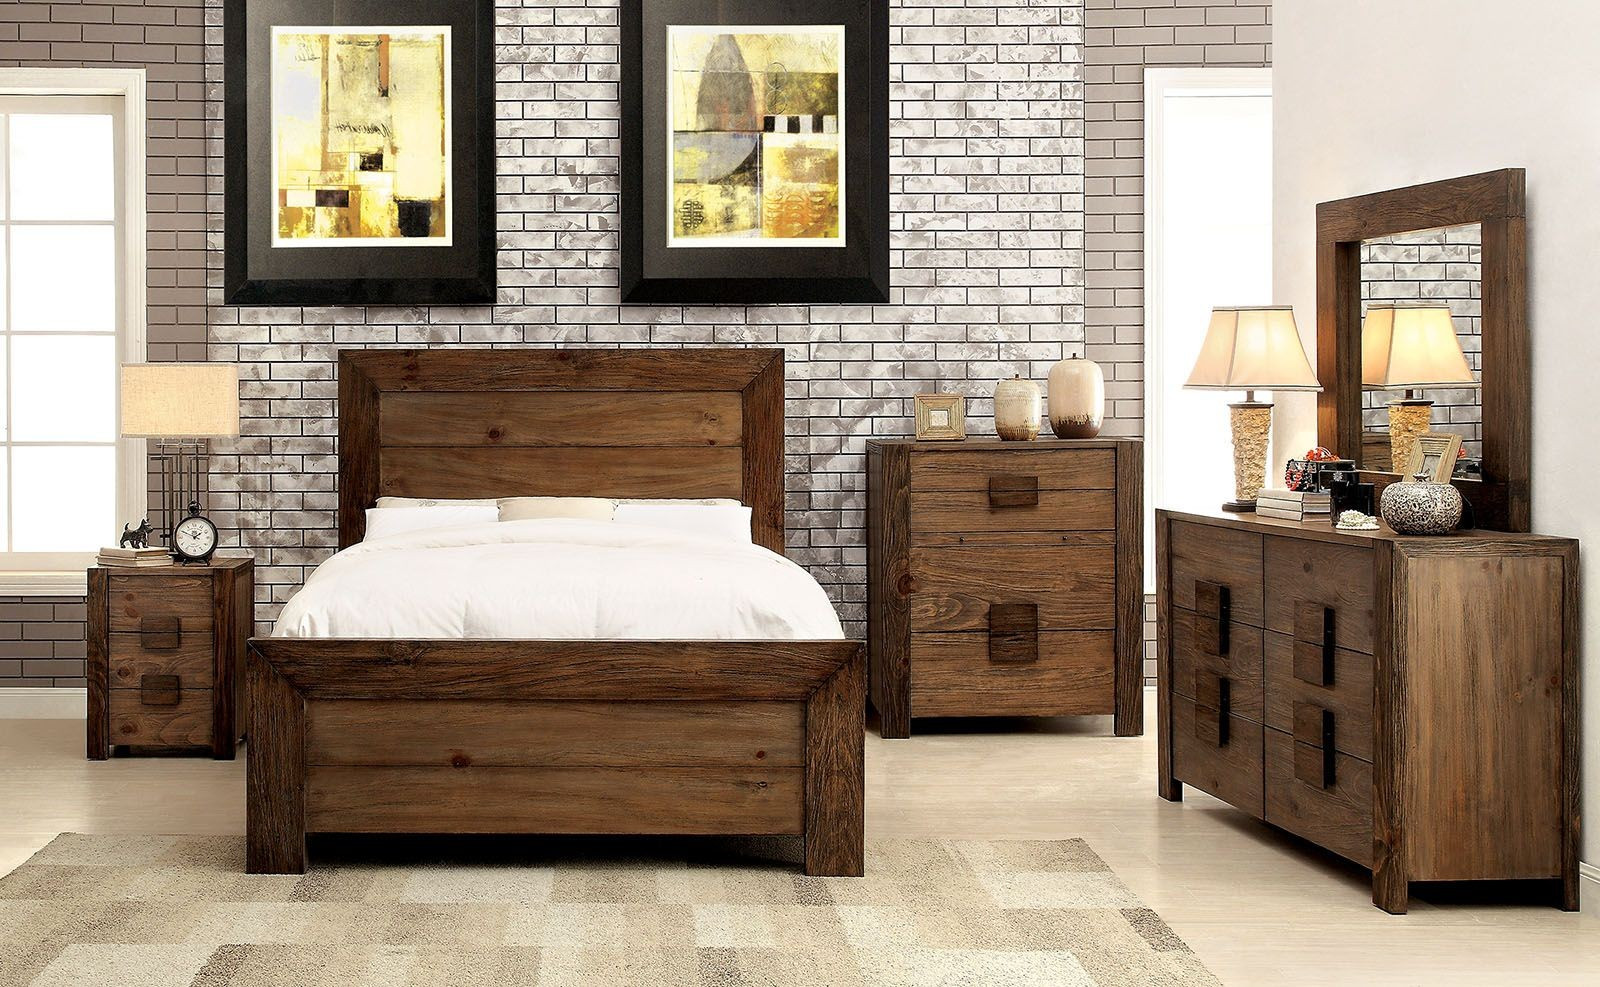 Cheap Rustic Bedroom Furniture Sets
 Aveiro Rustic Natural Panel Bedroom Set from Furniture of